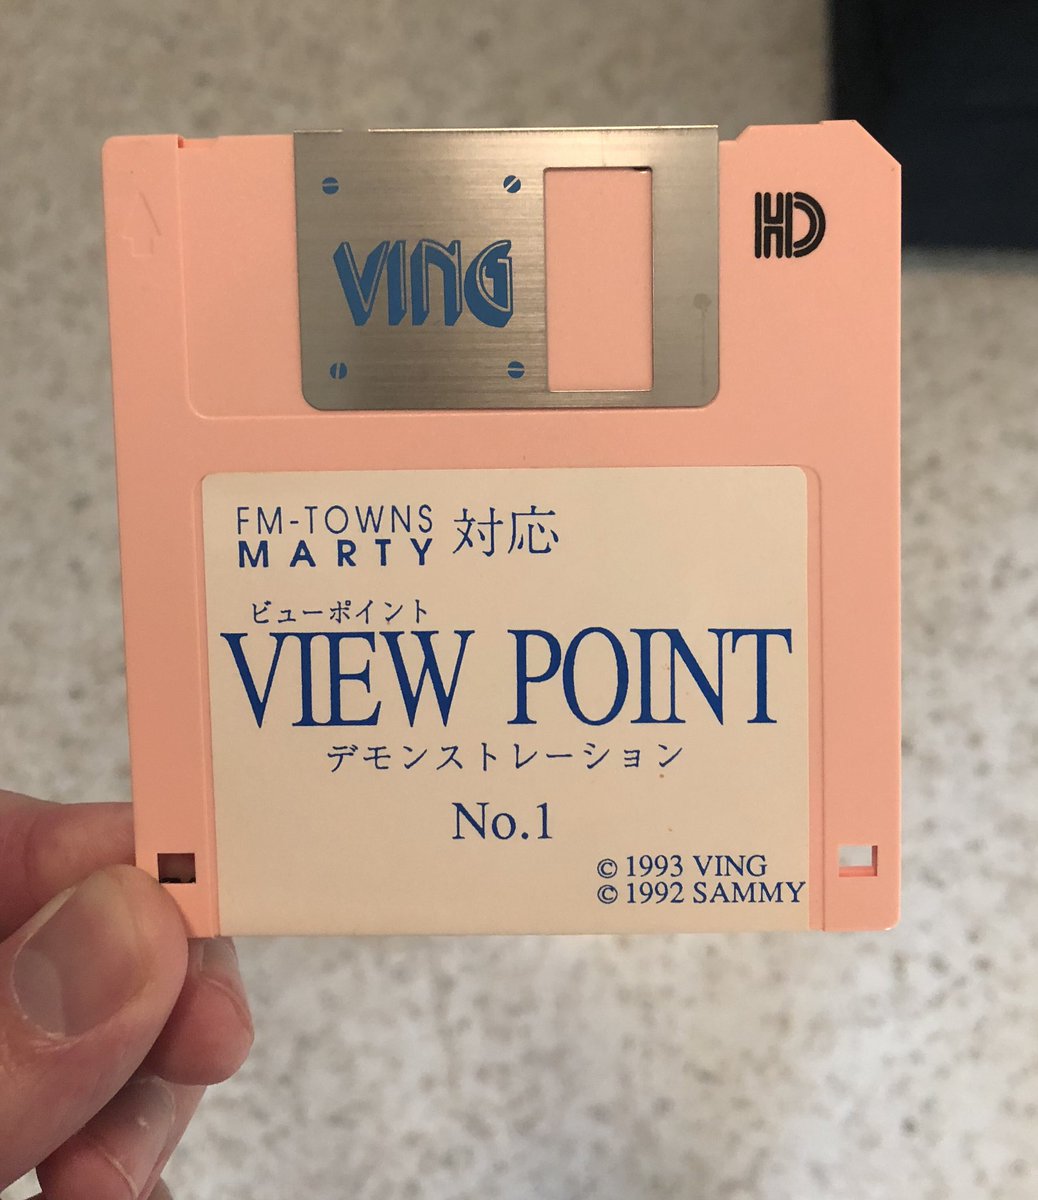 FM Towns Marty - View Point No. 1 (demo) (pink disk) : Ving : Free